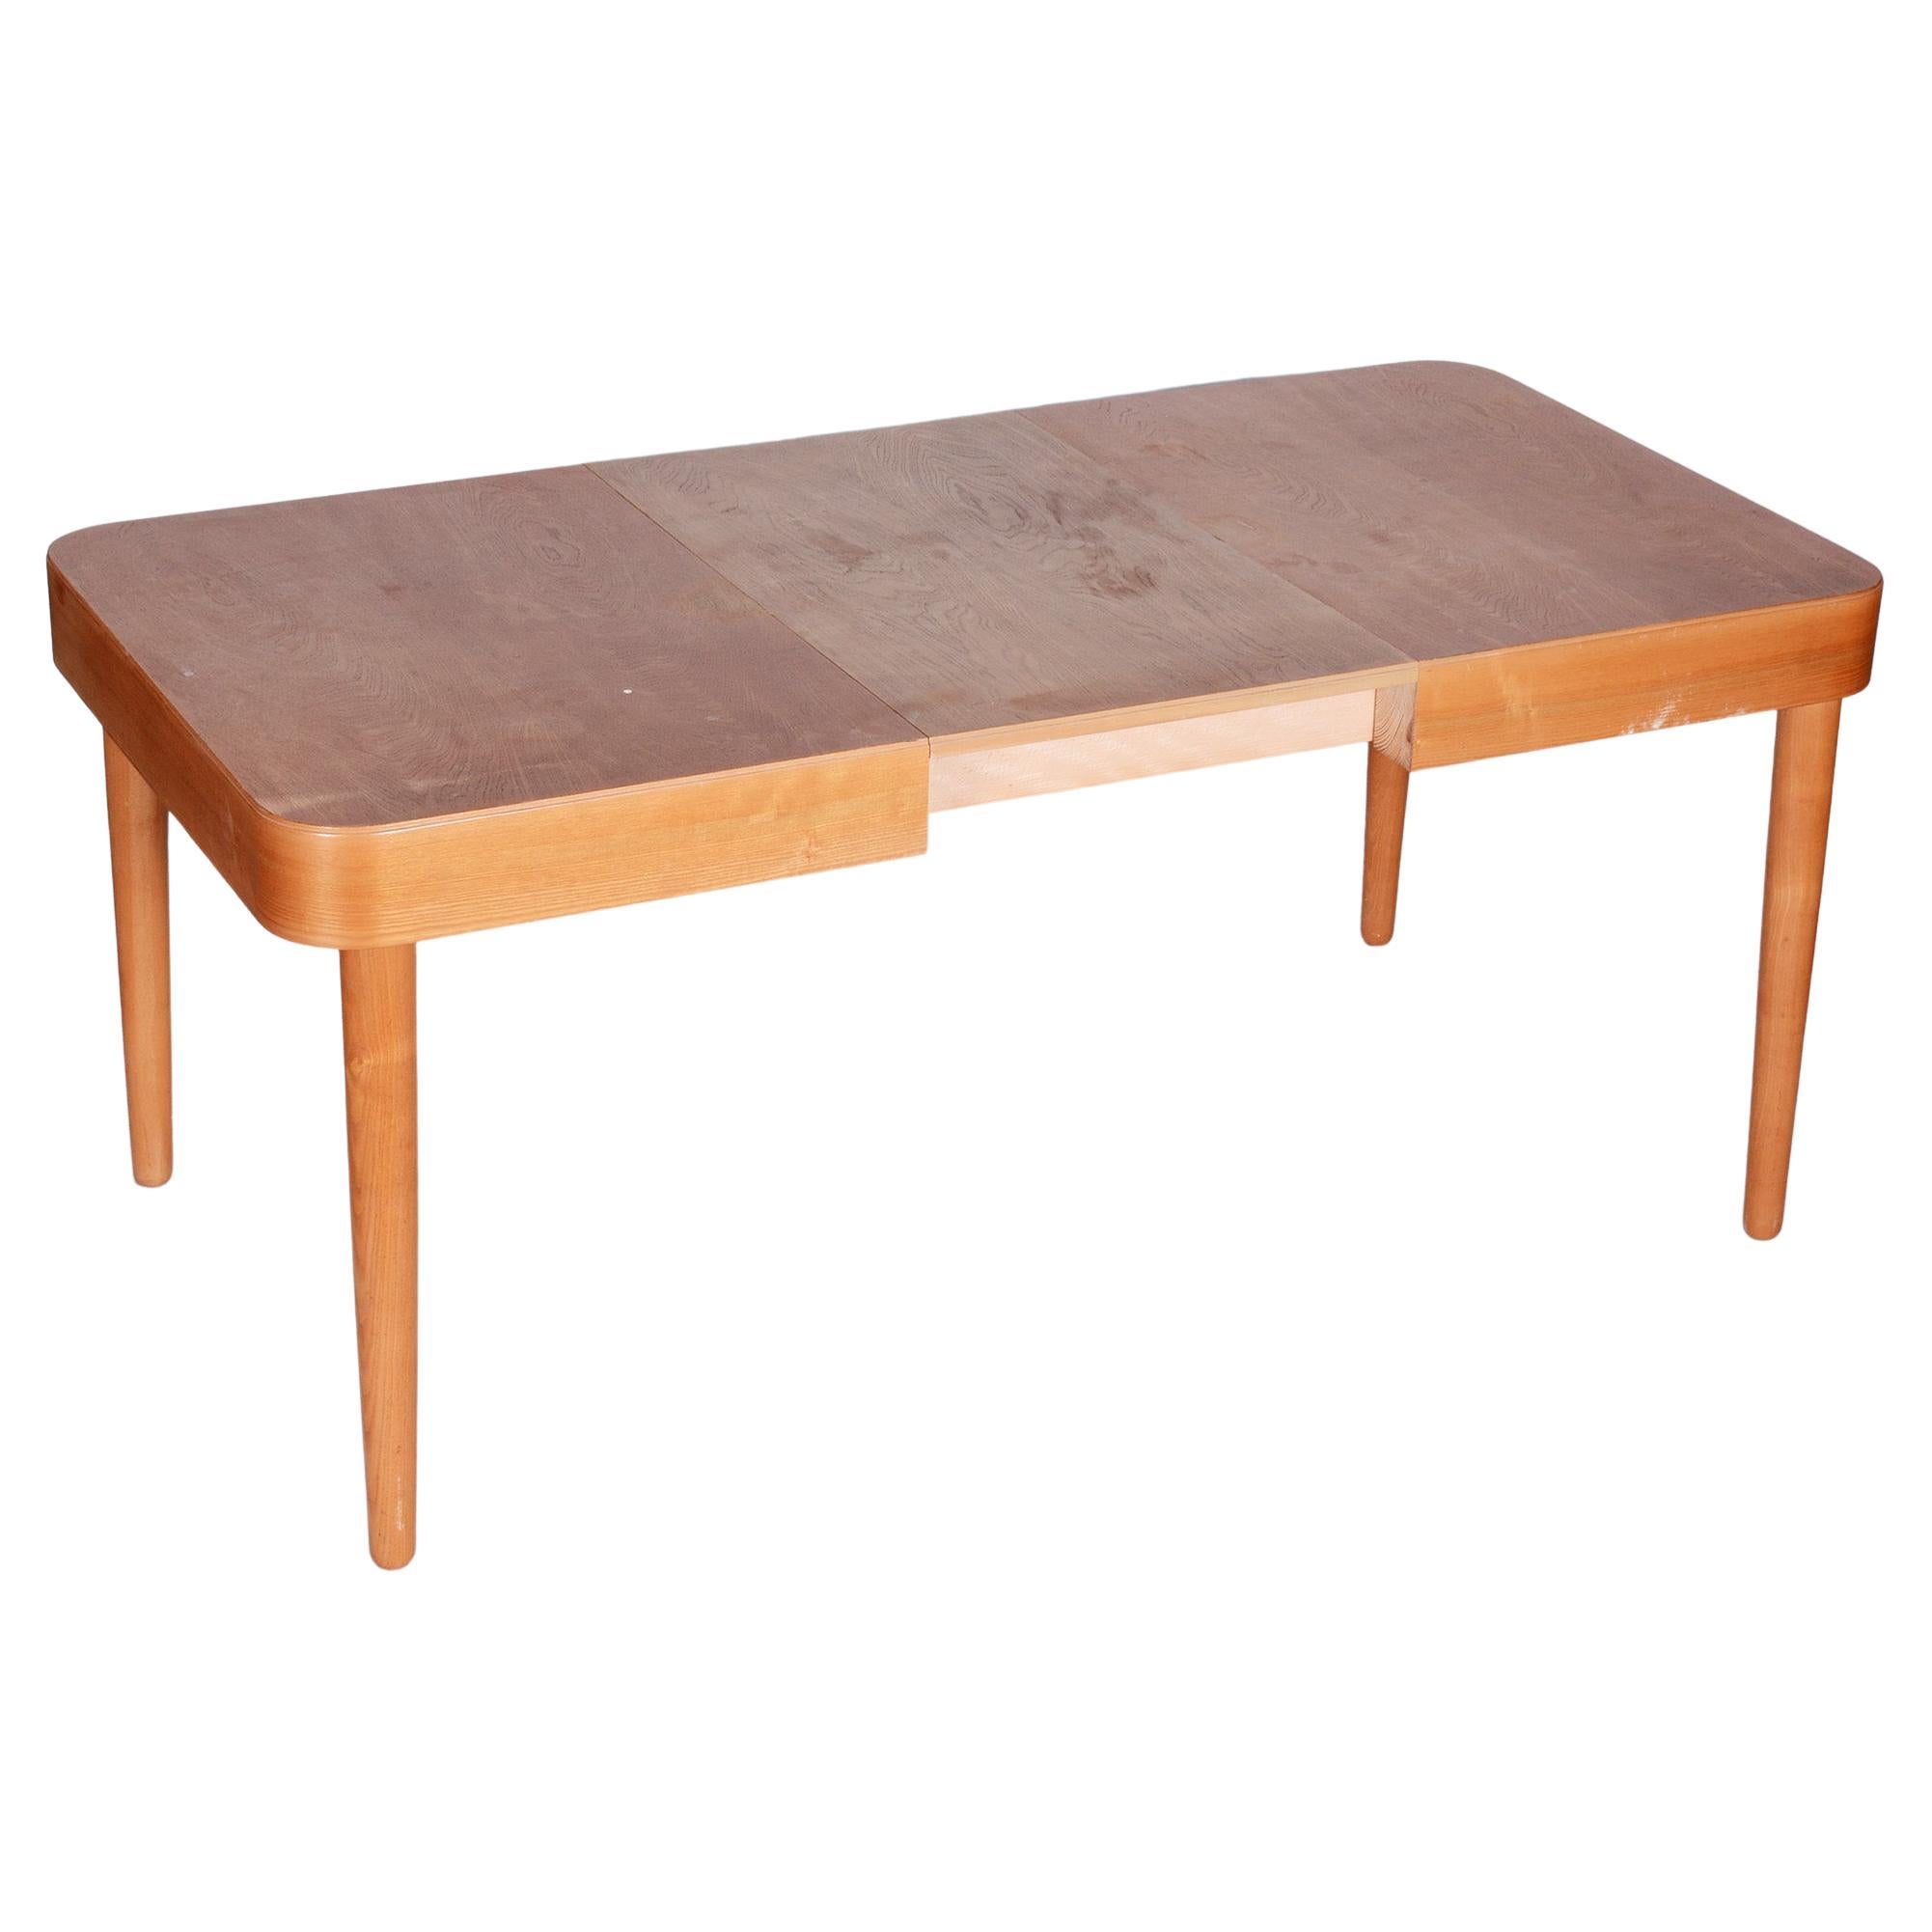 Midcentury Ash Dining Table, Made by Uluv, Revived Polish, Czechia, 1950s For Sale